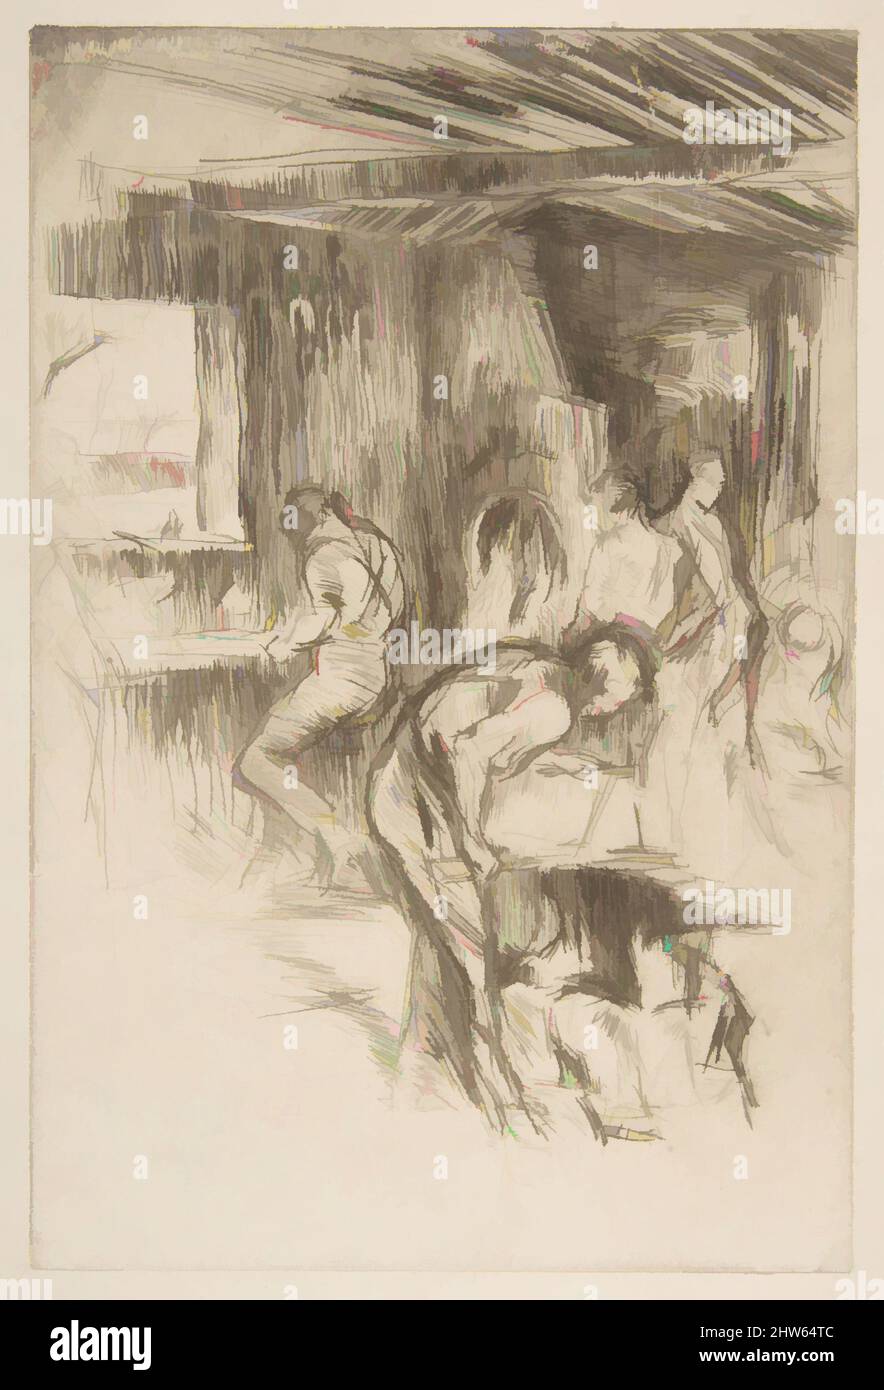 Art inspired by The Little Forge (The Little Forge, Liverpool), 1875, Drypoint; seventh state of sixteen (Glasgow); printed in black ink on ivory laid paper removed from a book, Plate: 8 7/8 × 5 7/8 in. (22.6 × 14.9 cm), Prints, James McNeill Whistler (American, Lowell, Massachusetts, Classic works modernized by Artotop with a splash of modernity. Shapes, color and value, eye-catching visual impact on art. Emotions through freedom of artworks in a contemporary way. A timeless message pursuing a wildly creative new direction. Artists turning to the digital medium and creating the Artotop NFT Stock Photo